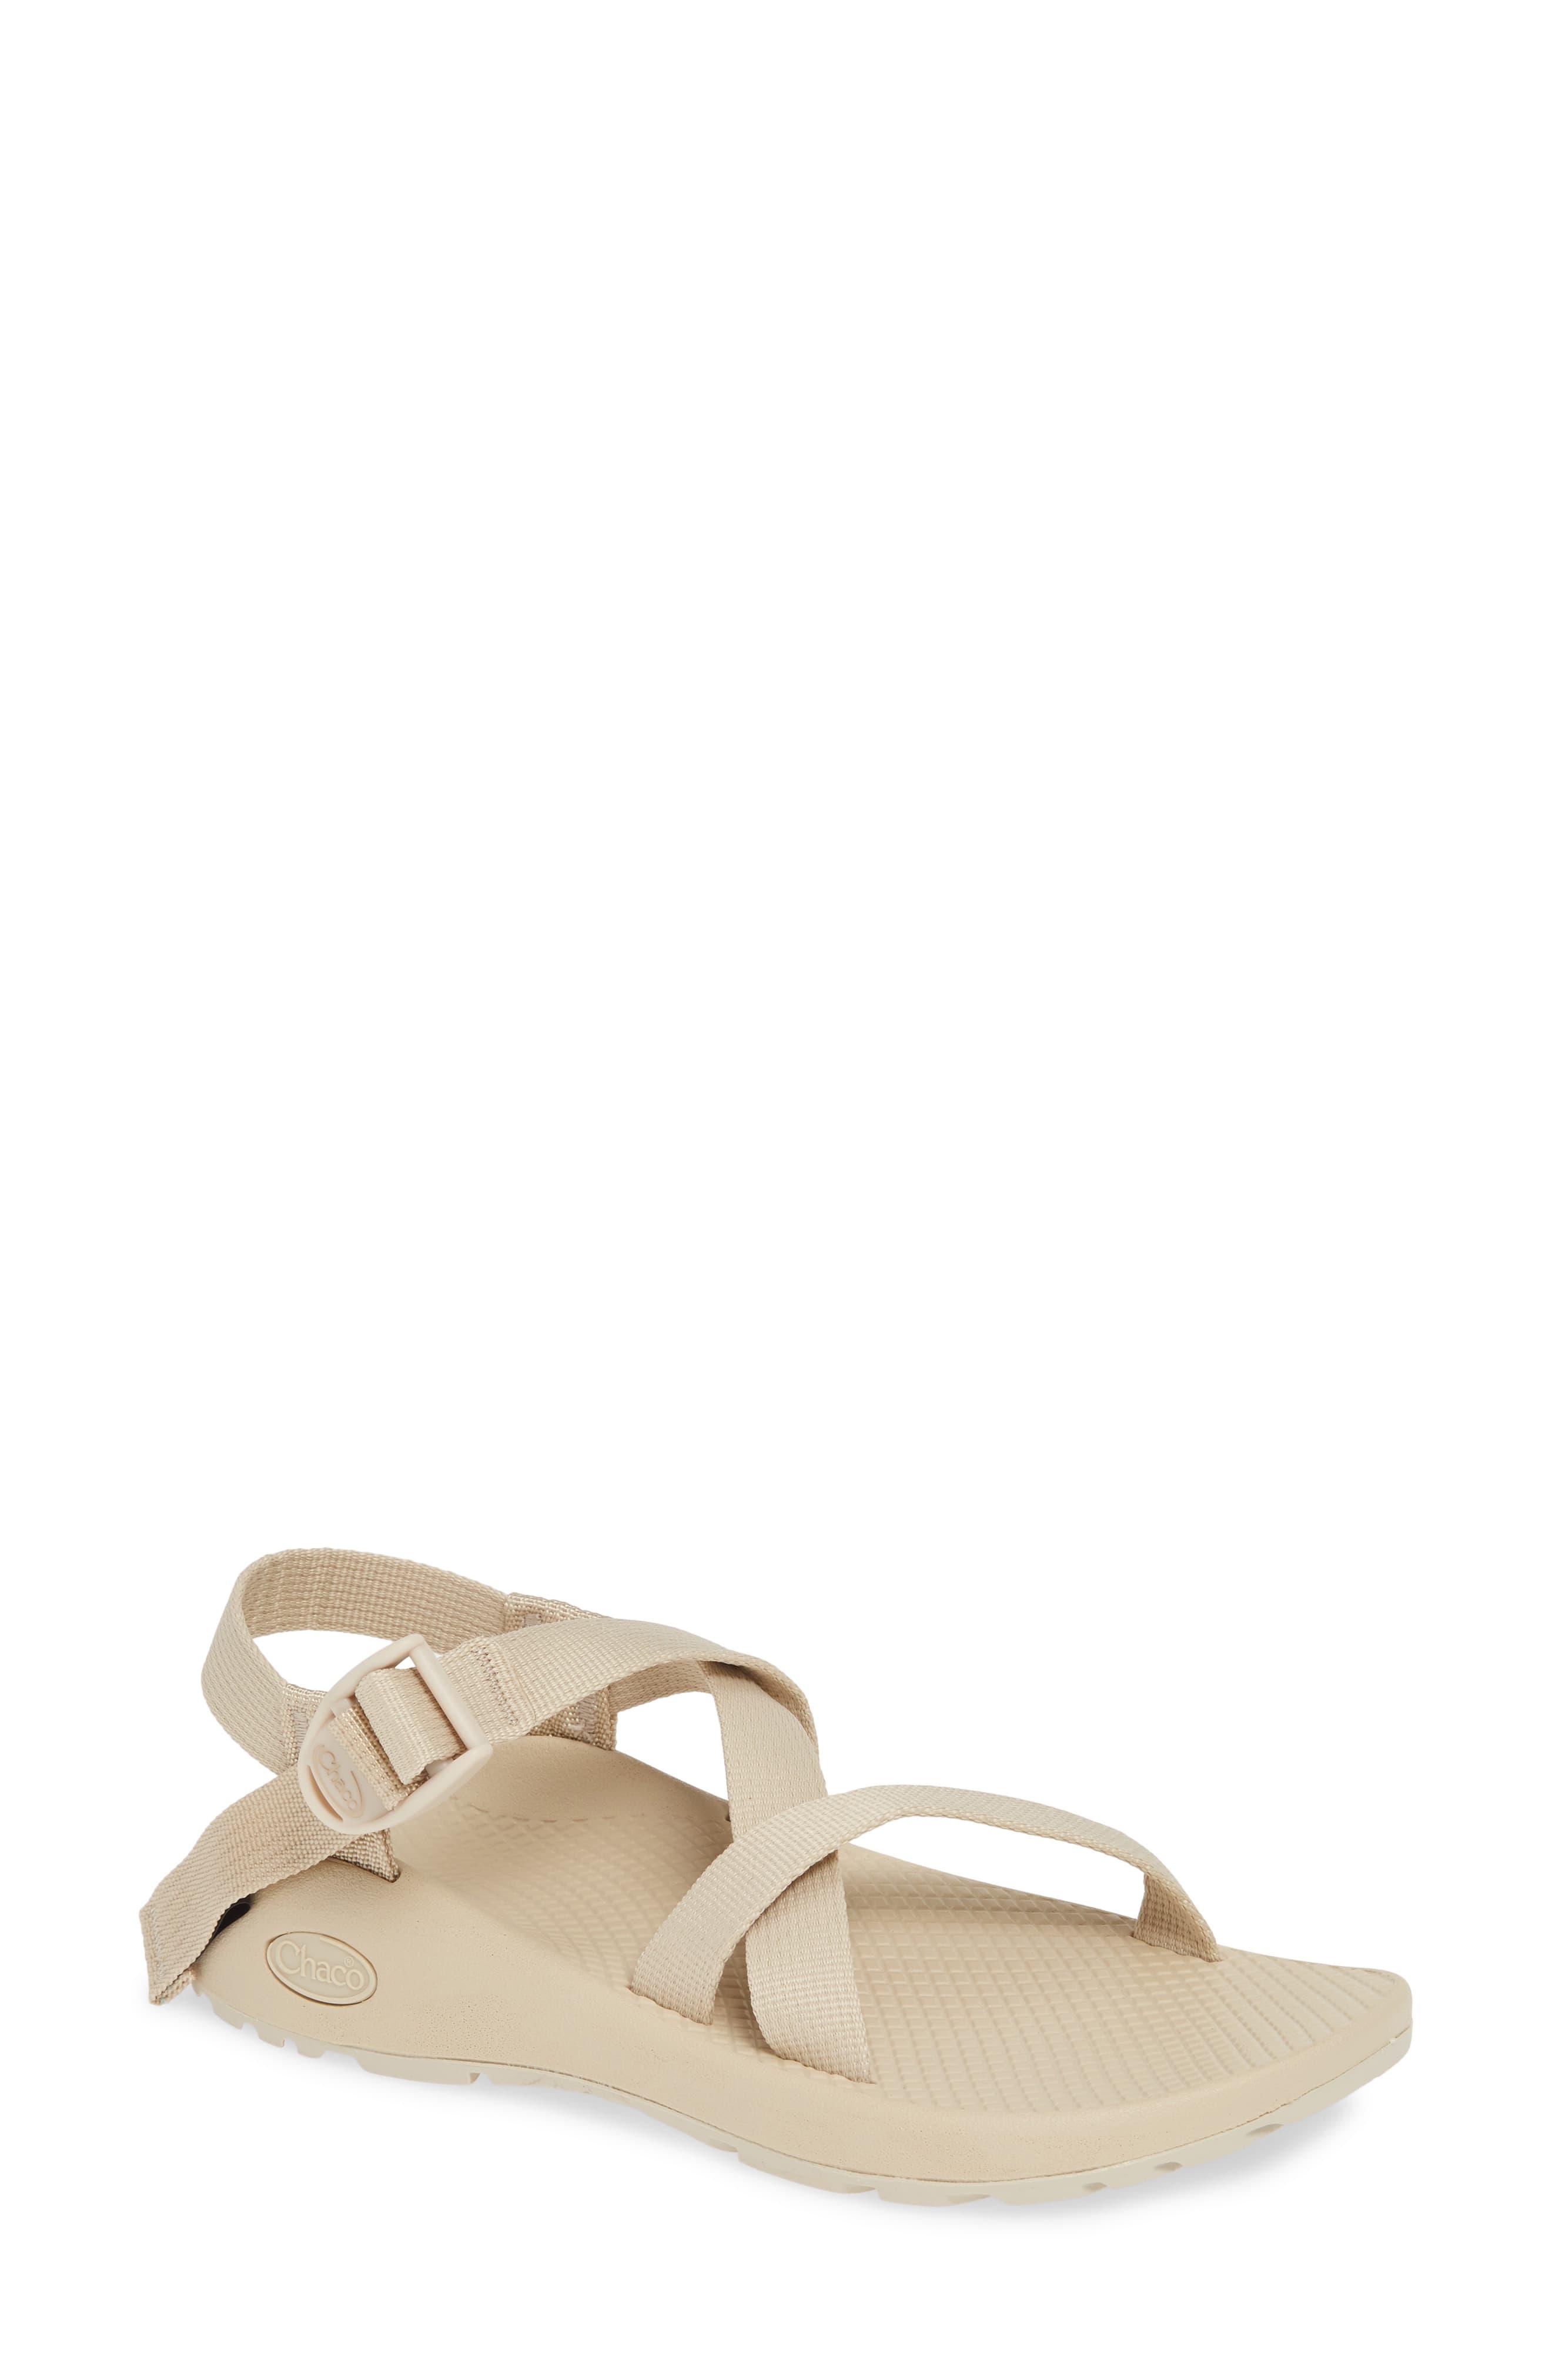 Chaco Synthetic Z1 Classic Monochrome Sandal in Natural - Lyst